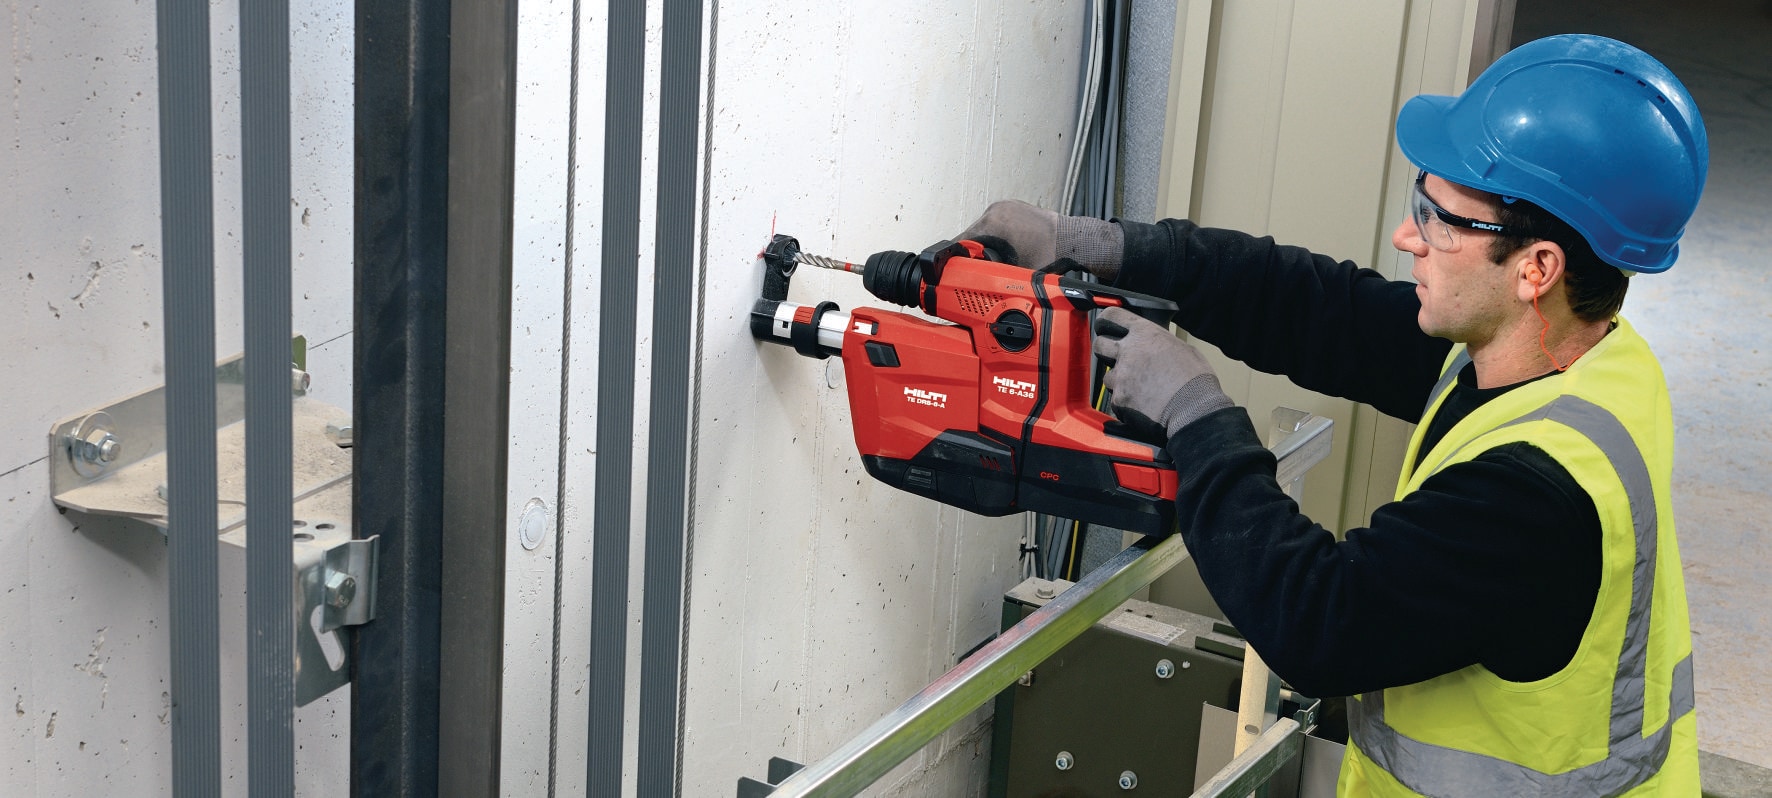 TE 6-A36 Cordless rotary hammer Cordless SDS Plus Rotary Hammers Hilti  USA